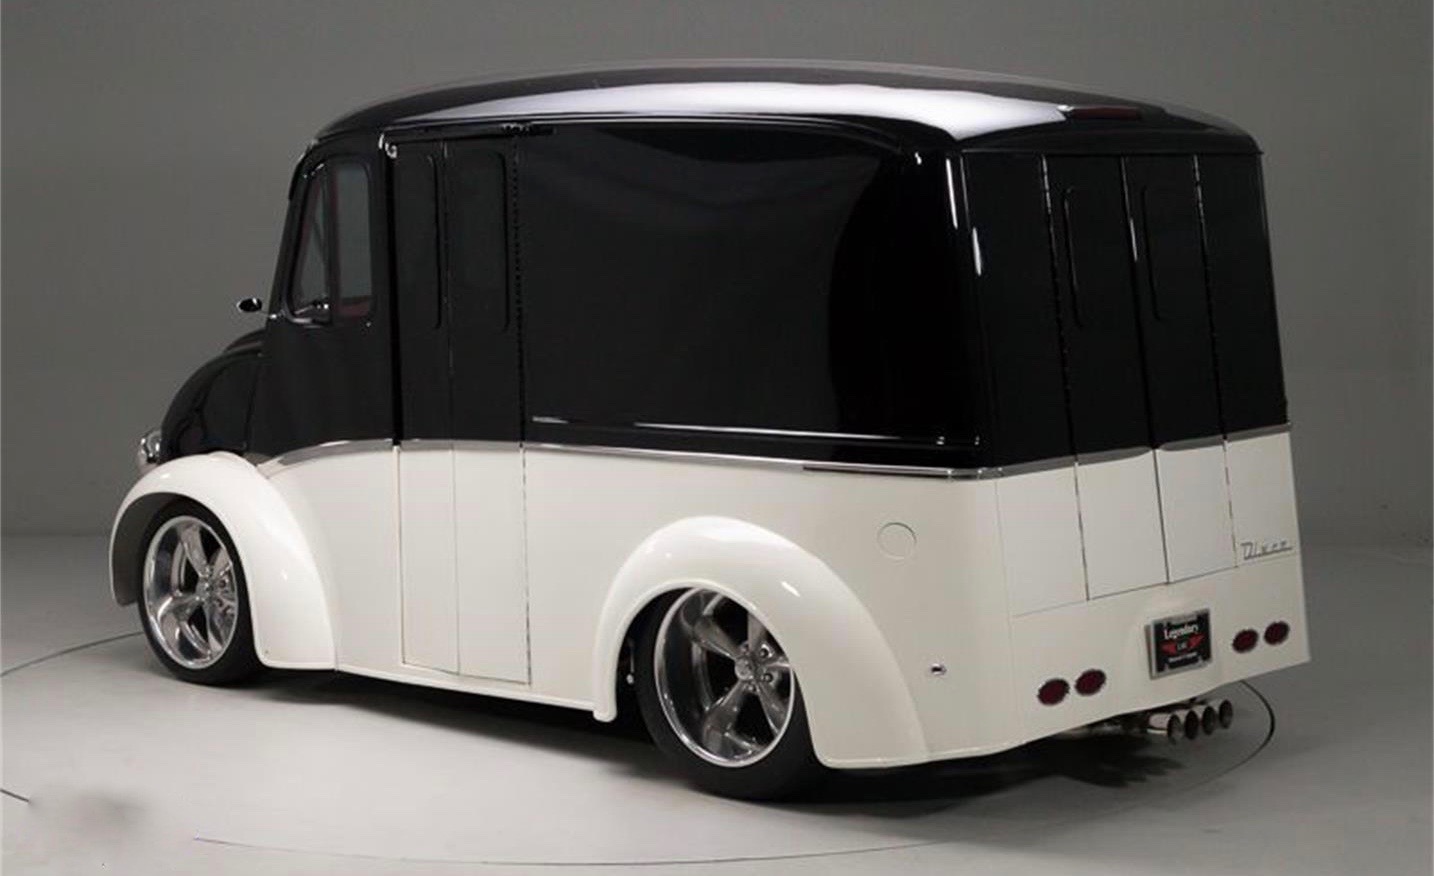 Divco van, Speedy deliveries: This custom van really delivers, ClassicCars.com Journal